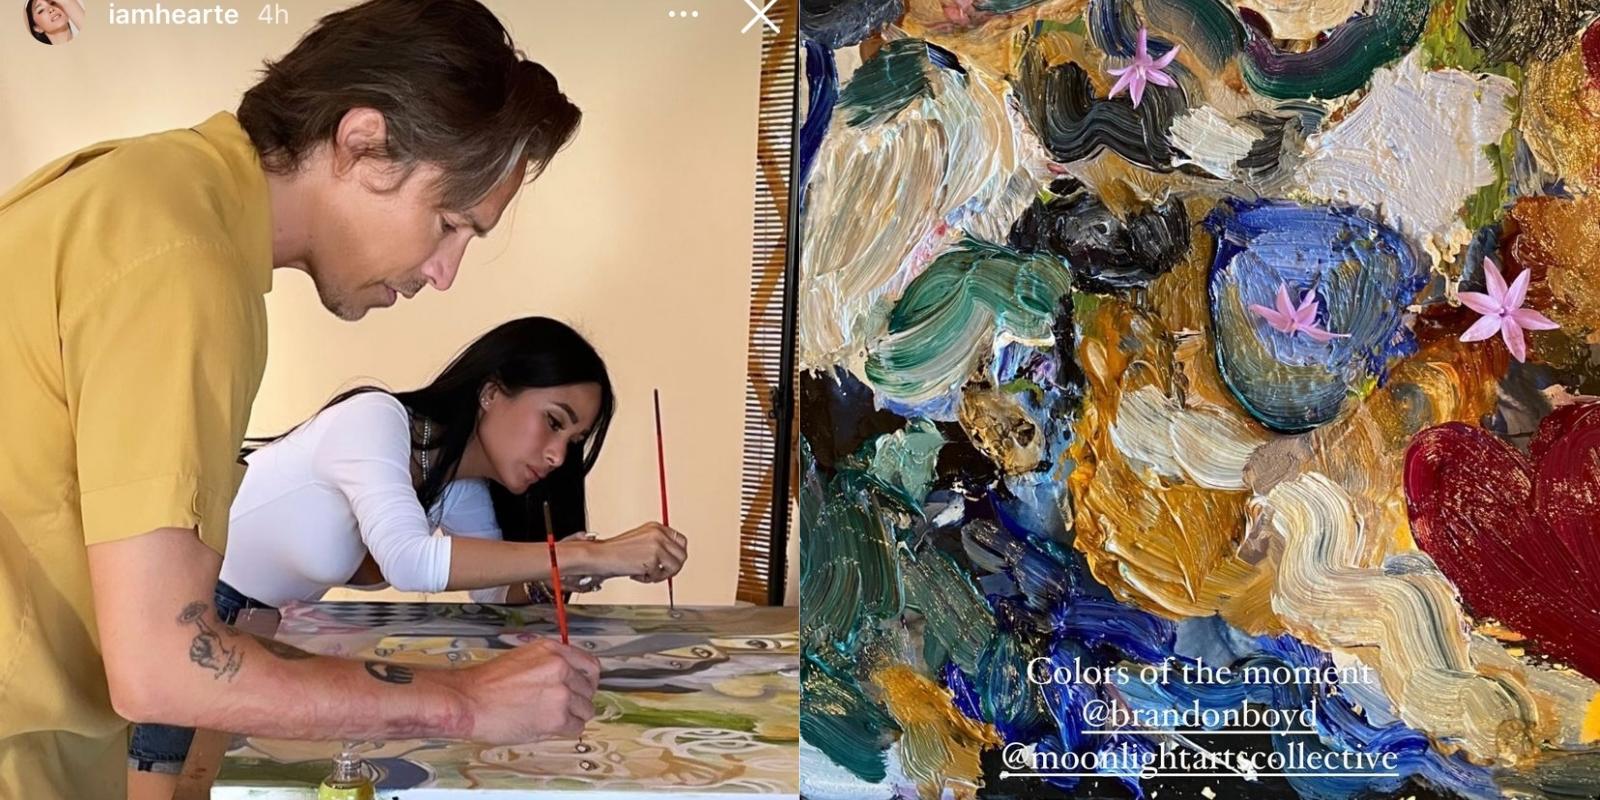 Heart Evangelista's painting is one of a kind